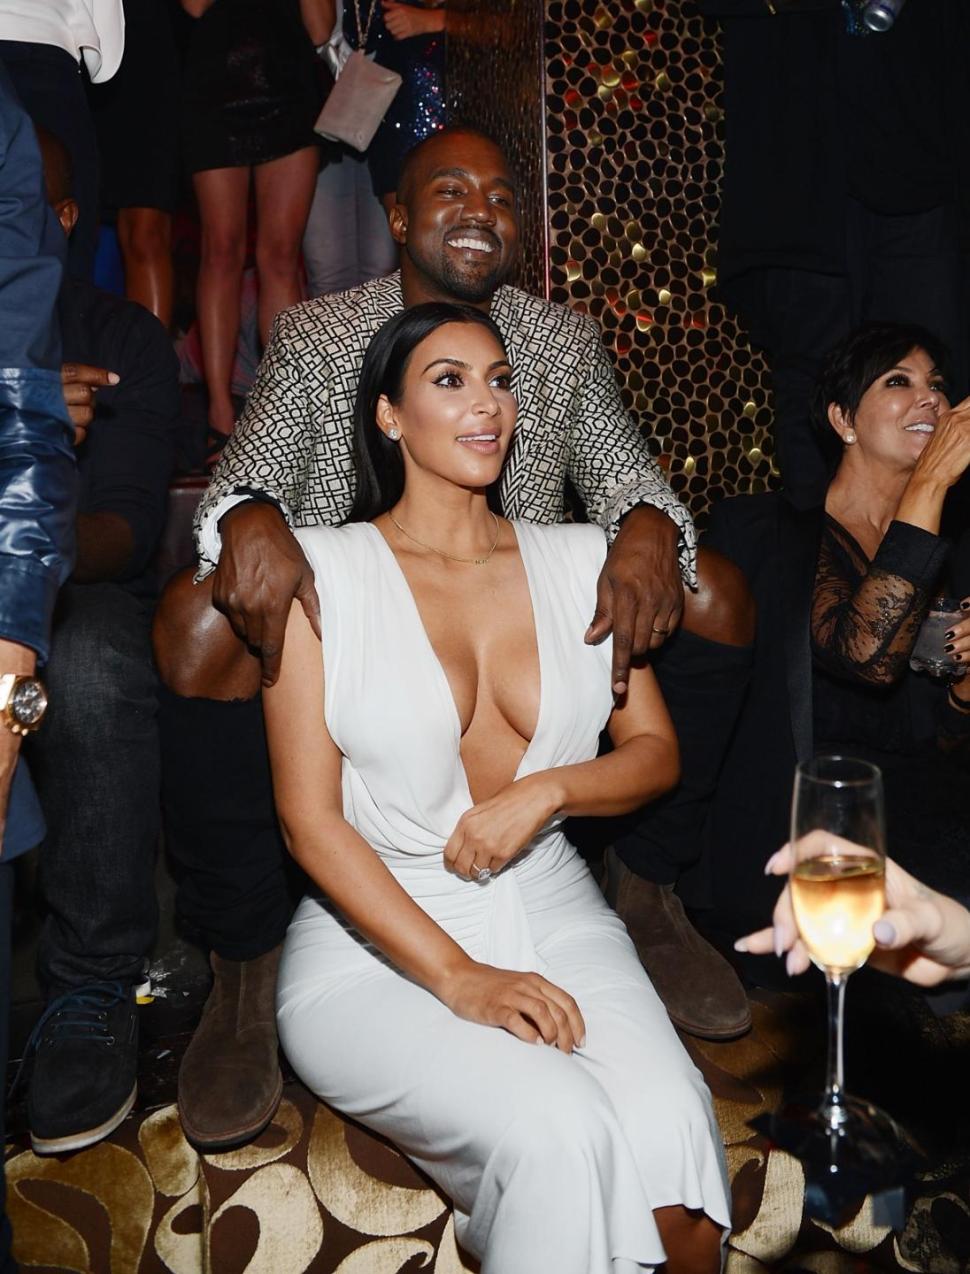 Kim Kardashian, takes the plunge with a daring neckline, with hubby Kanye West in Vegas Friday.